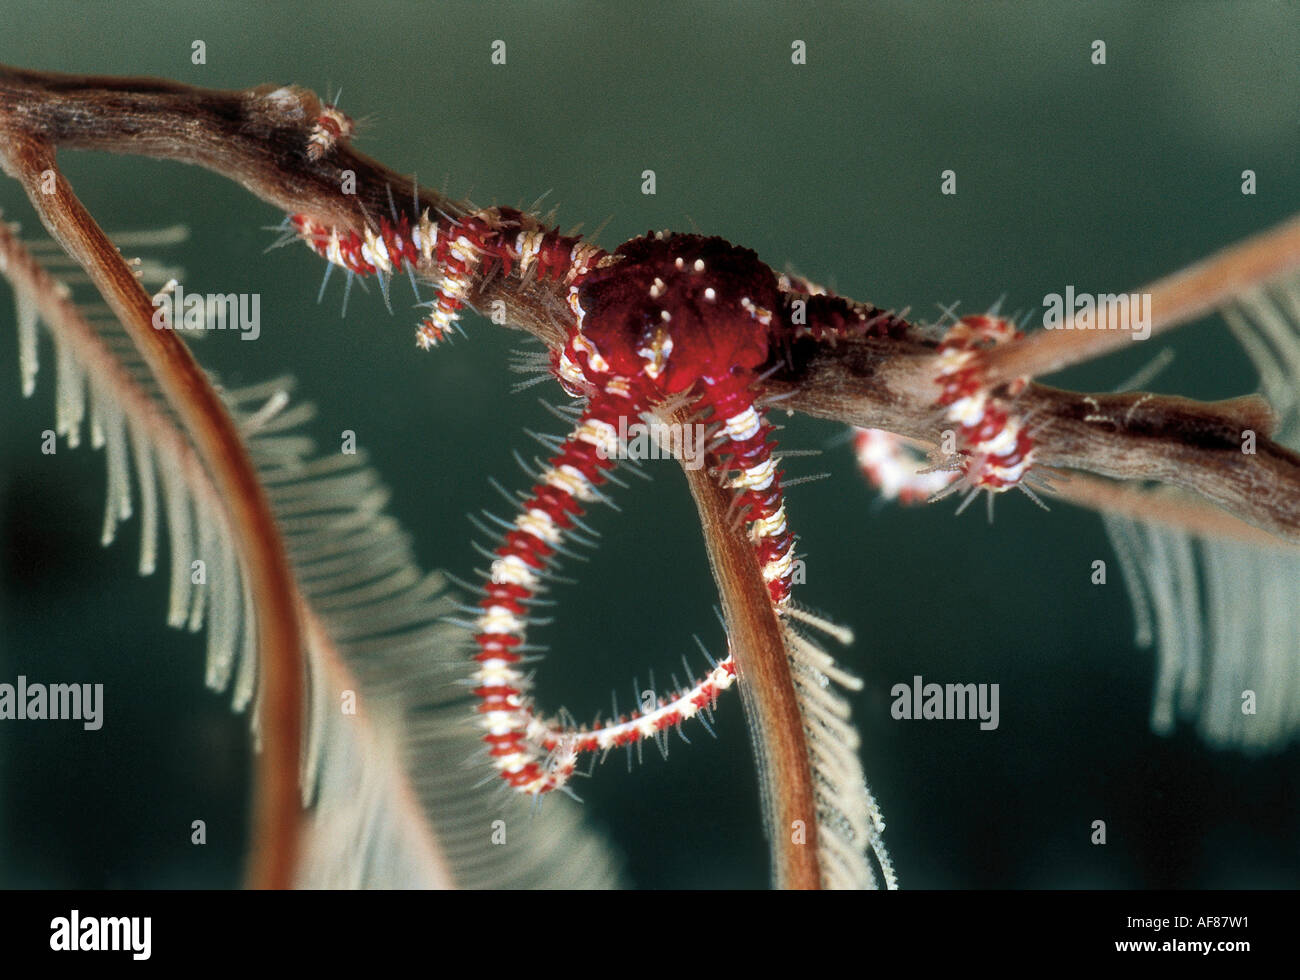 A Brittle star (Ophiuroidea sp.) on a hydroid frond... Stock Photo